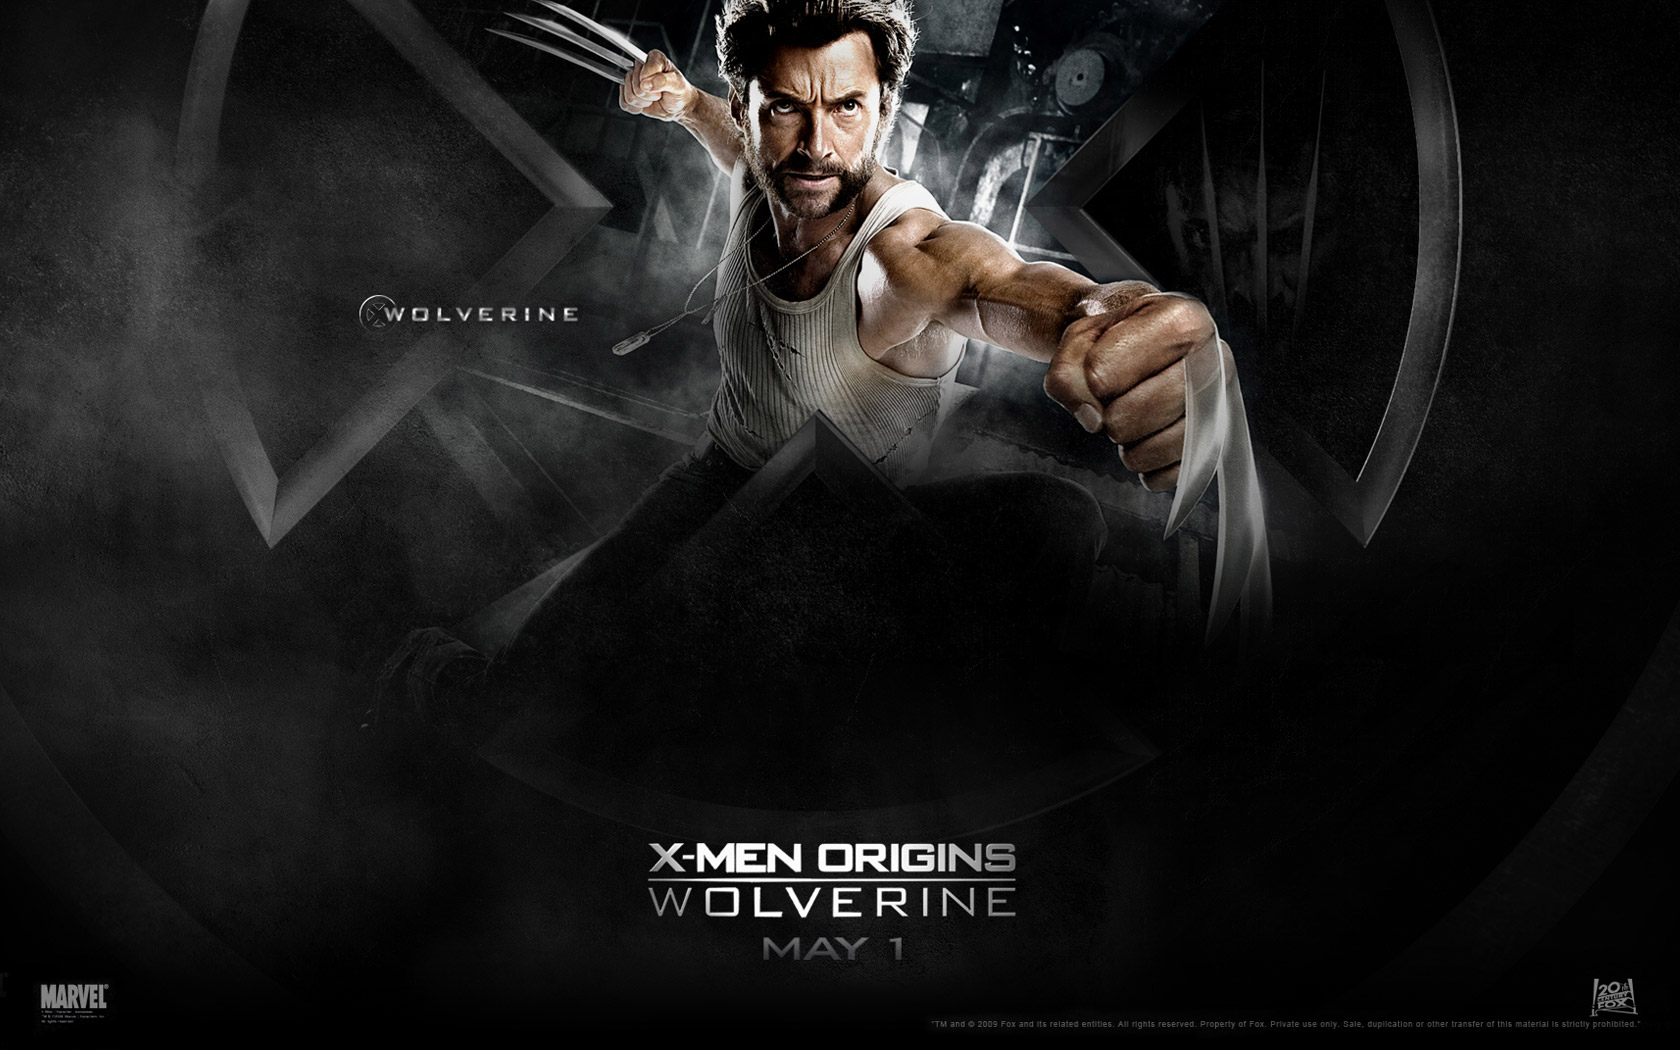 X-Men Origins: Wolverine X-Men Origins: Wolverine Wallpaper - Wolverine  Wallpaper - X-Men Origins: Wolverine X-Men Origins: Wolverine Wallpaper -  Wolverine Backgrounds (1680 x 1050)